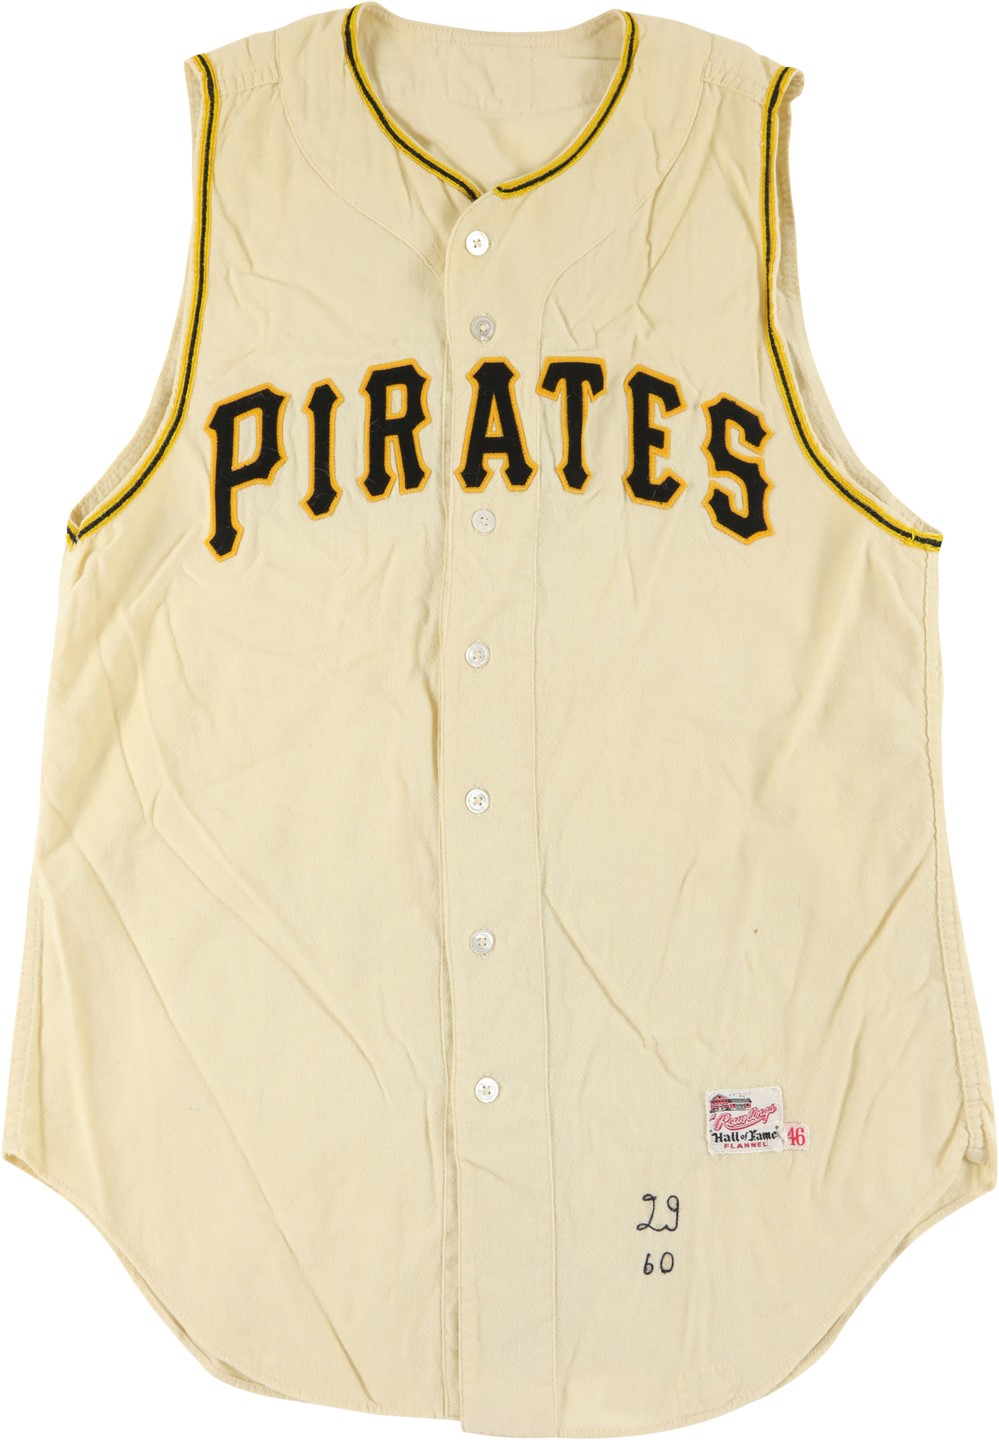 Clemente and Pittsburgh Pirates - 1960 Clem Labine and Others Pittsburgh Pirates Game Worn Jersey